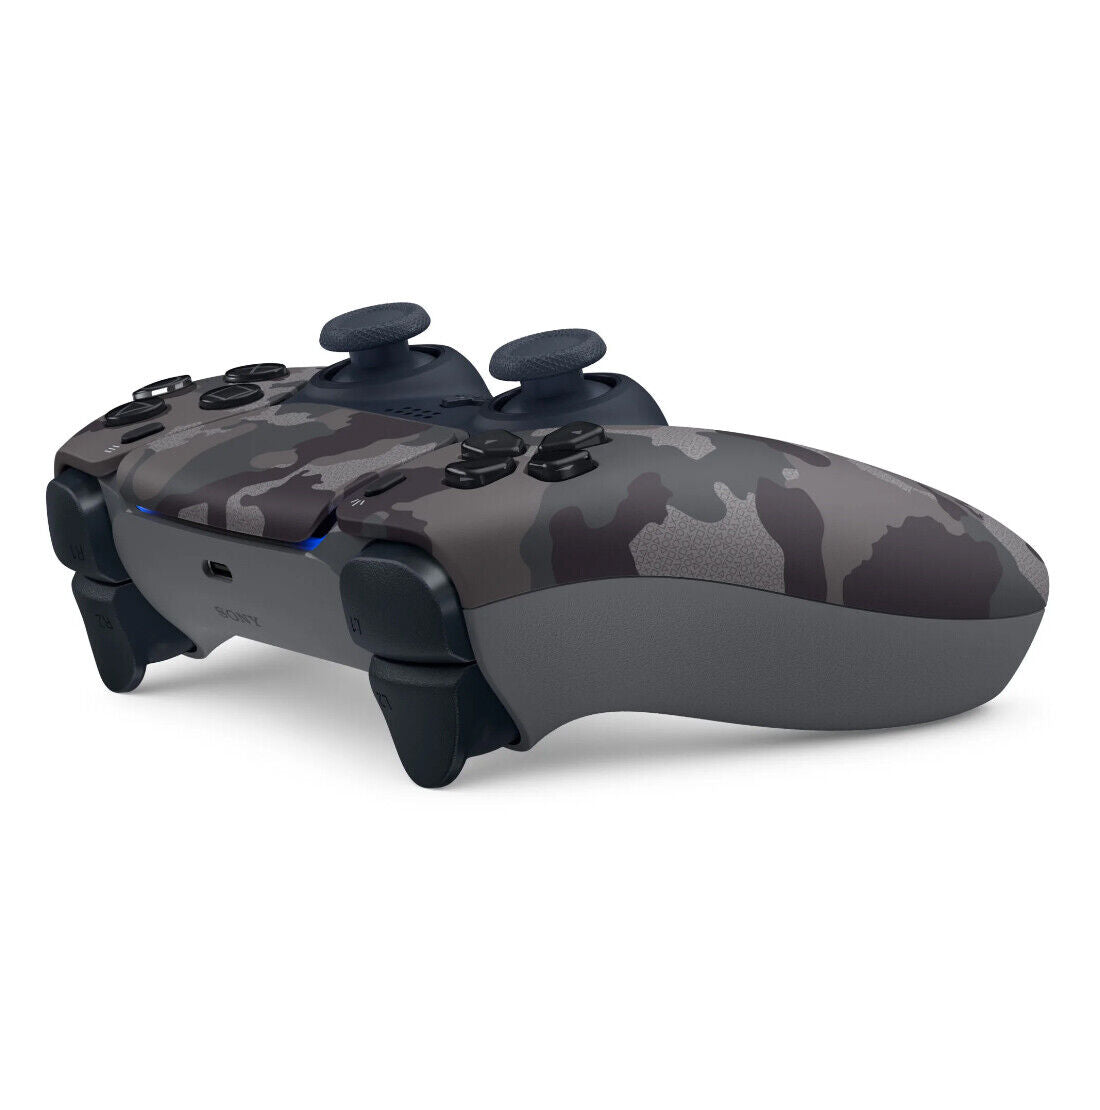 Sony PS5 DualSense Wireless Controller - Gray Camouflage - Level UpSonyPlaystation 5 Accessories711719423393